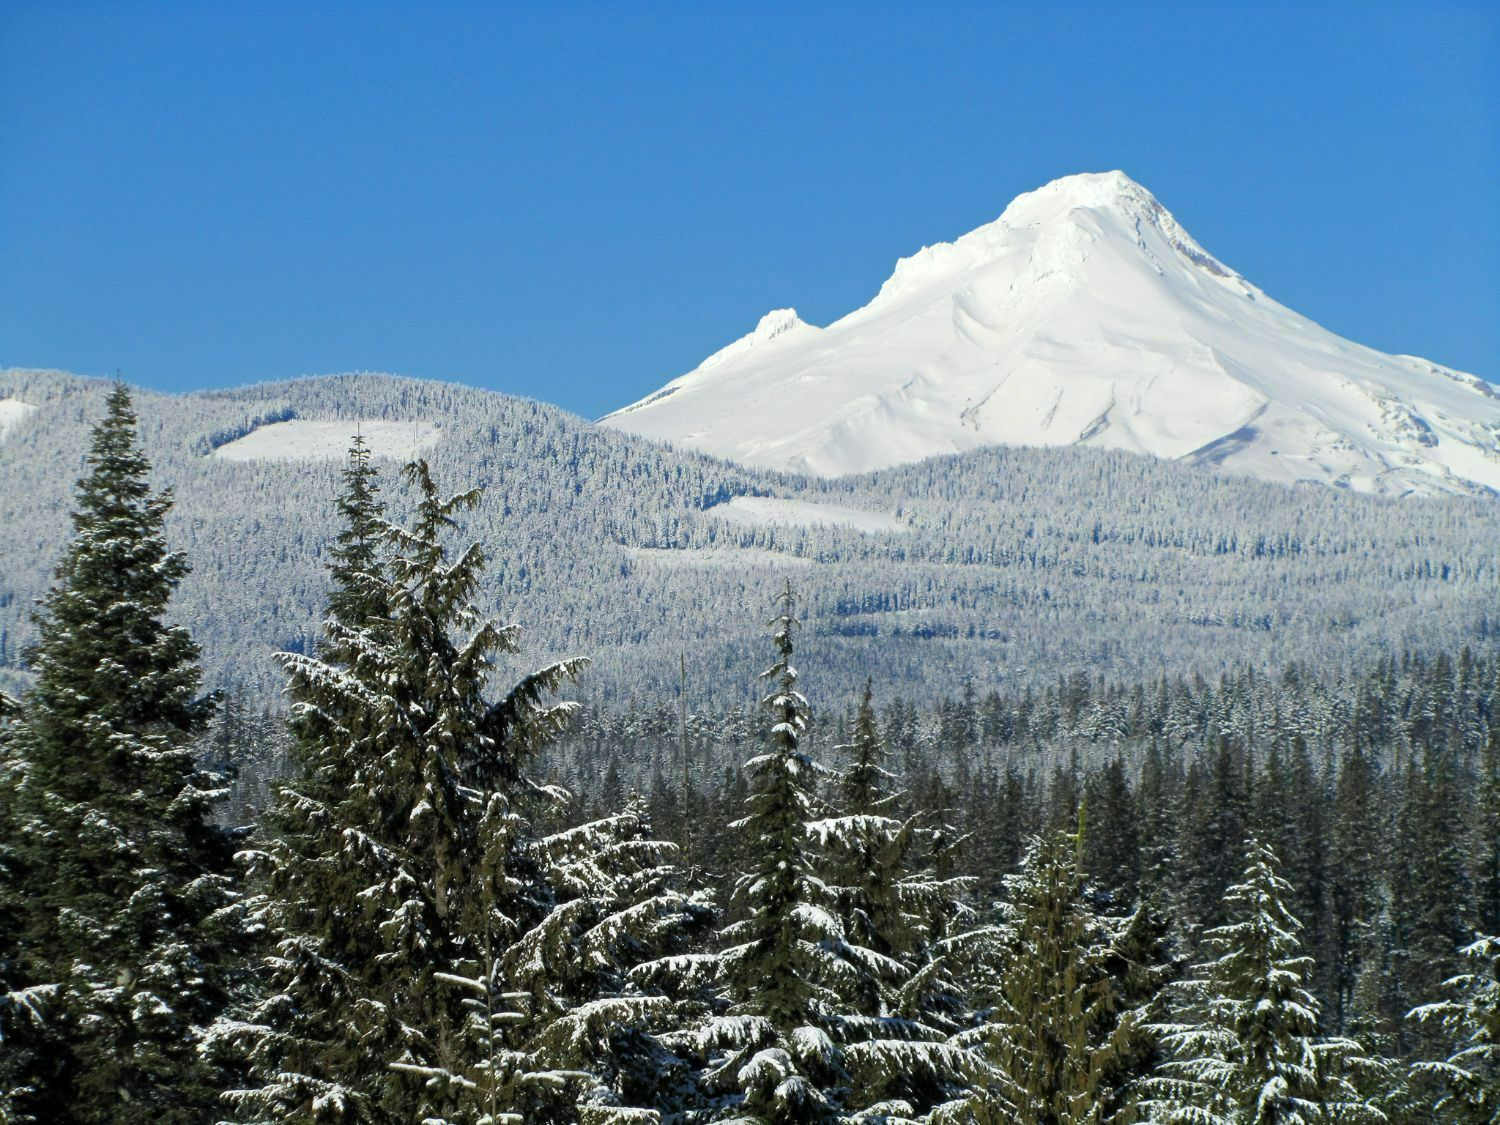 Color photo of a snowy Mt. Hood on a clear, cloudless day. The bright blue sky stands in contrast to the white blanket of snow covering the mountain and the surrounding coniferous forest. In the foreground some of the closer trees appear in more detail, with less snow.